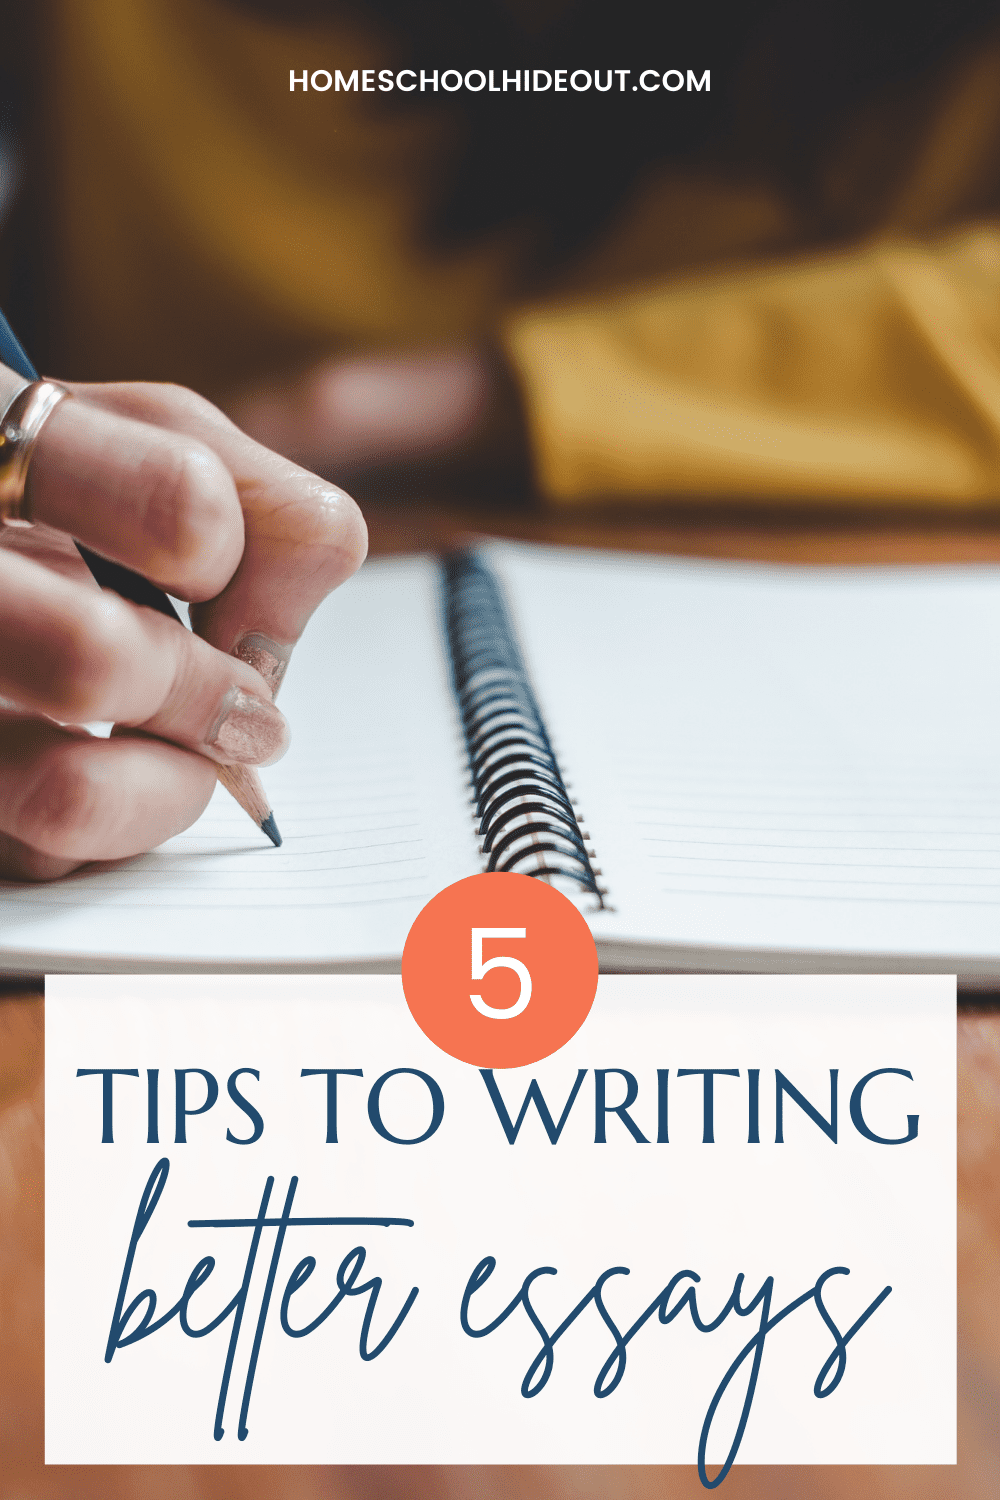 If you struggle to write good essays, these tips are just what you need! #3 helped me the most!